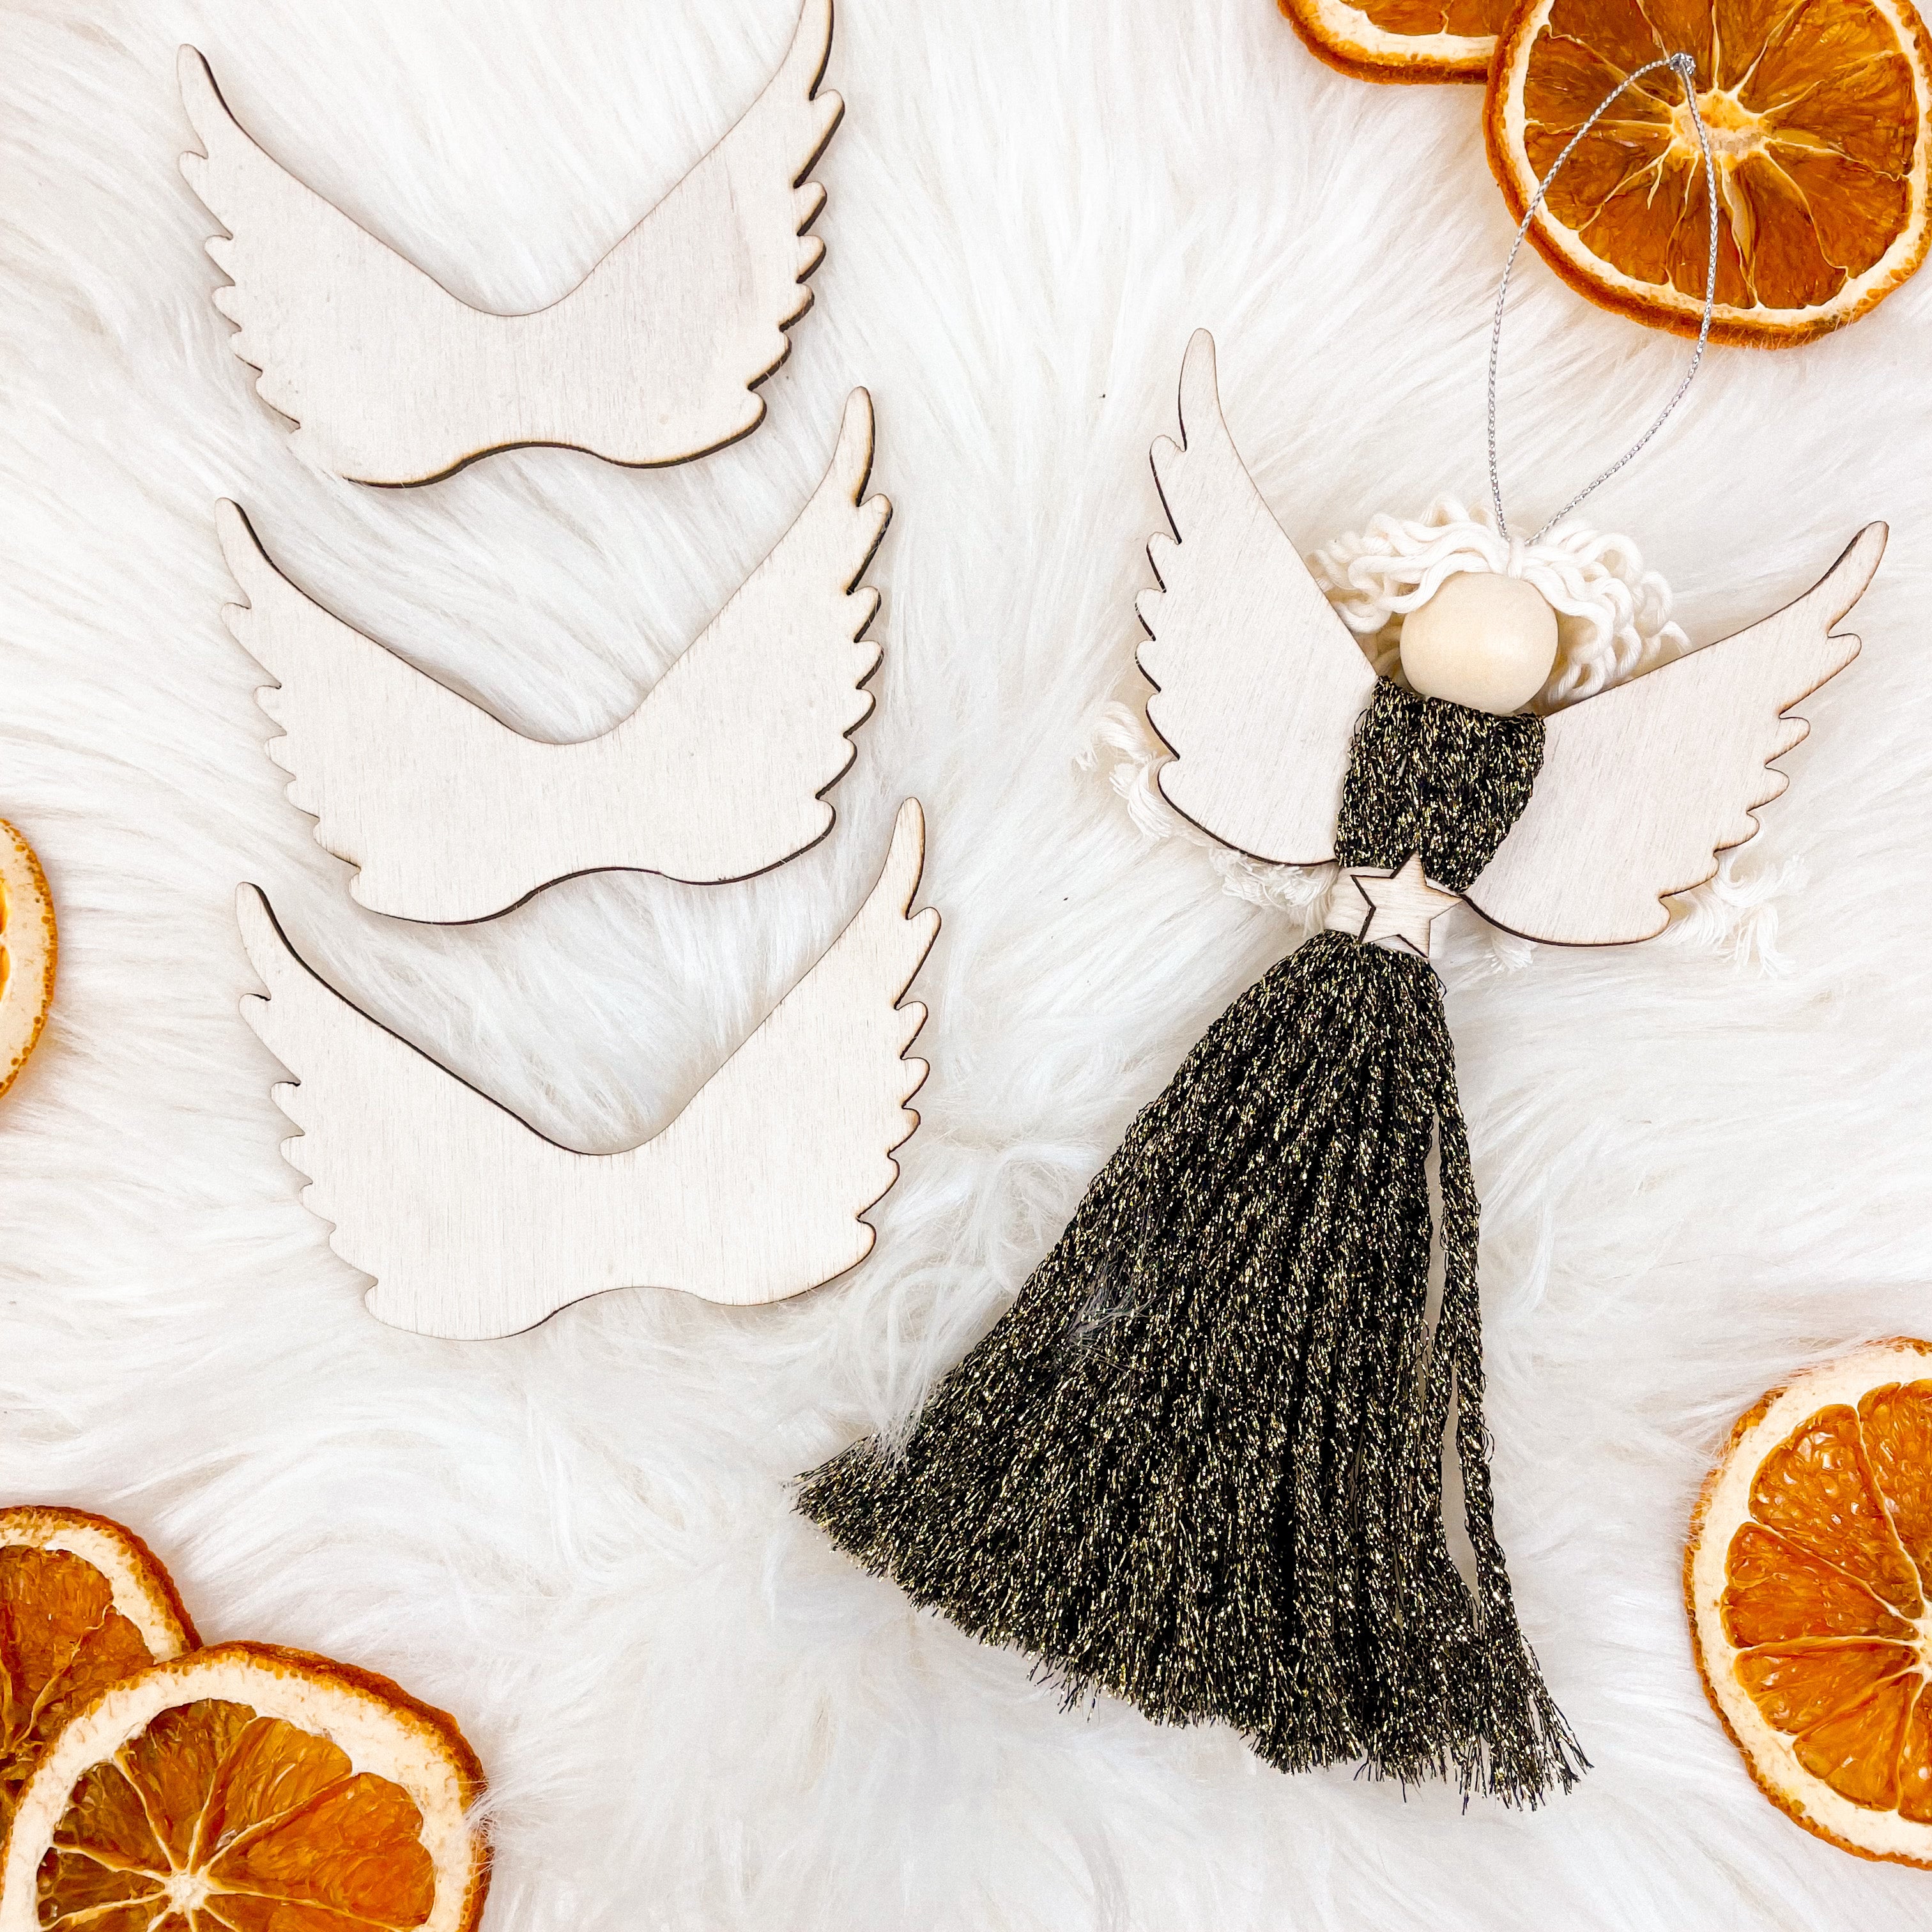 Wholesale small angel wings for crafts Available For Your Crafting